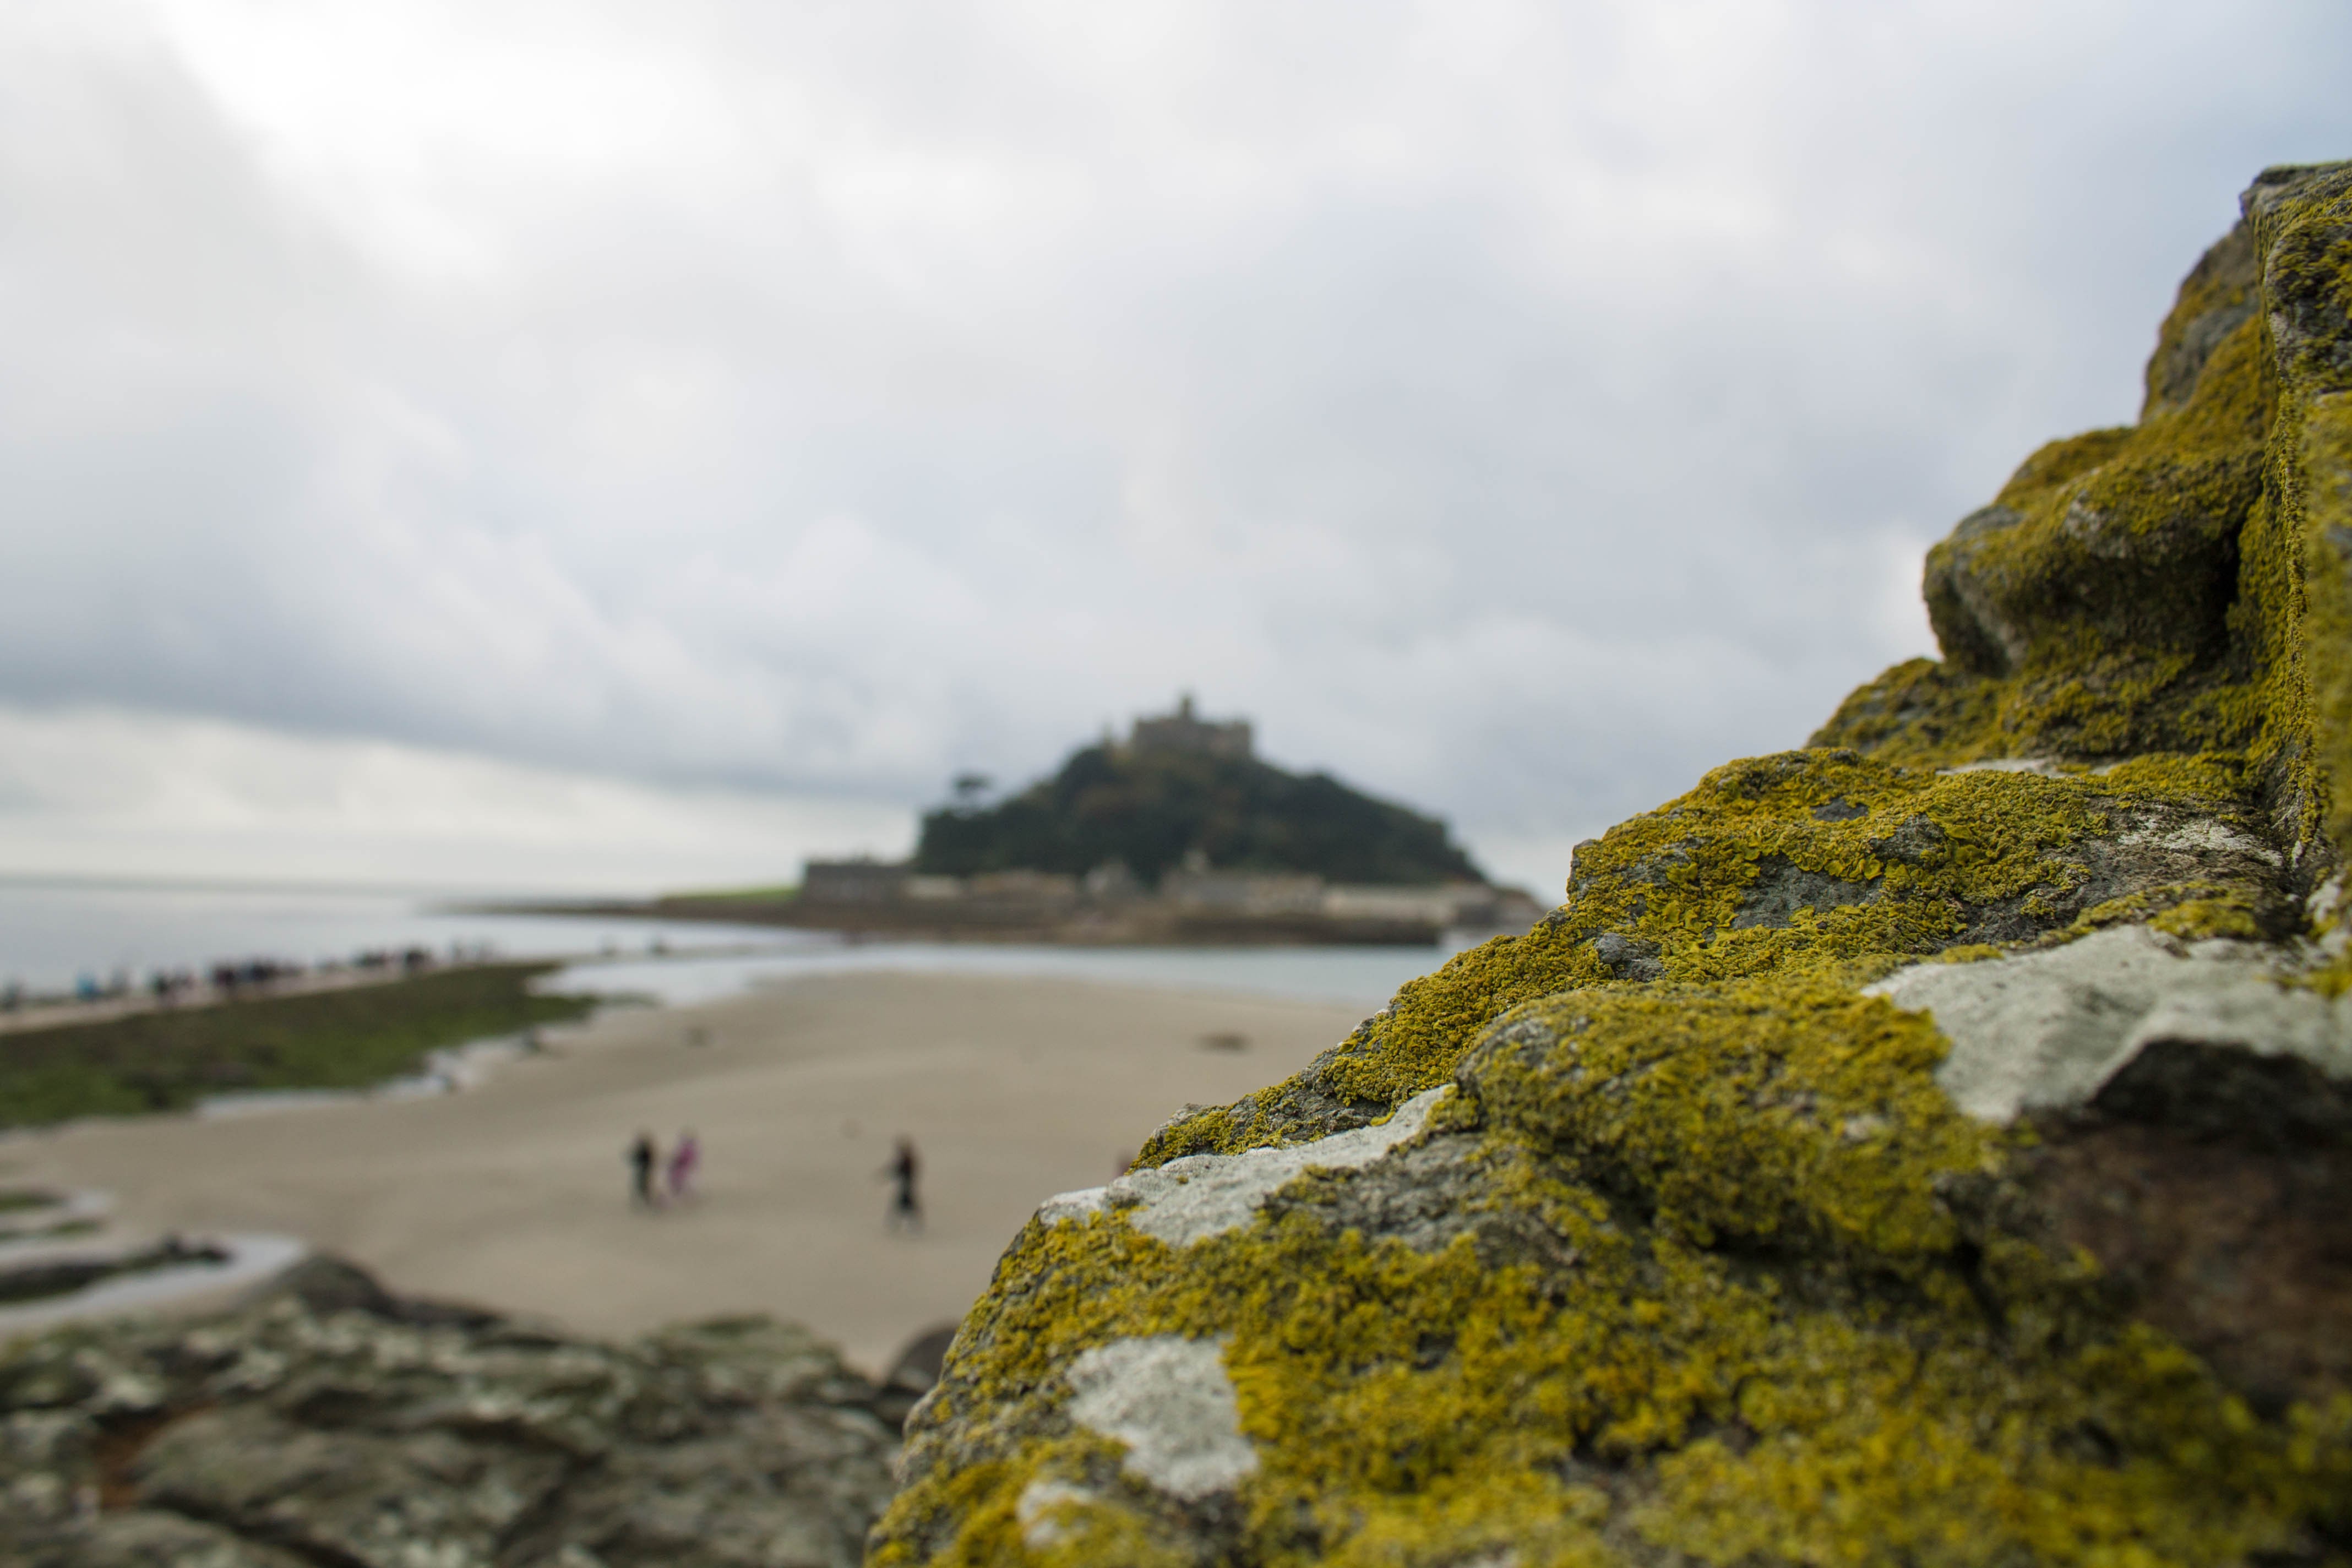 General 4272x2848 landscape nature photoshopped architecture moss depth of field Mont Saint-Michel beach water sand sky clouds